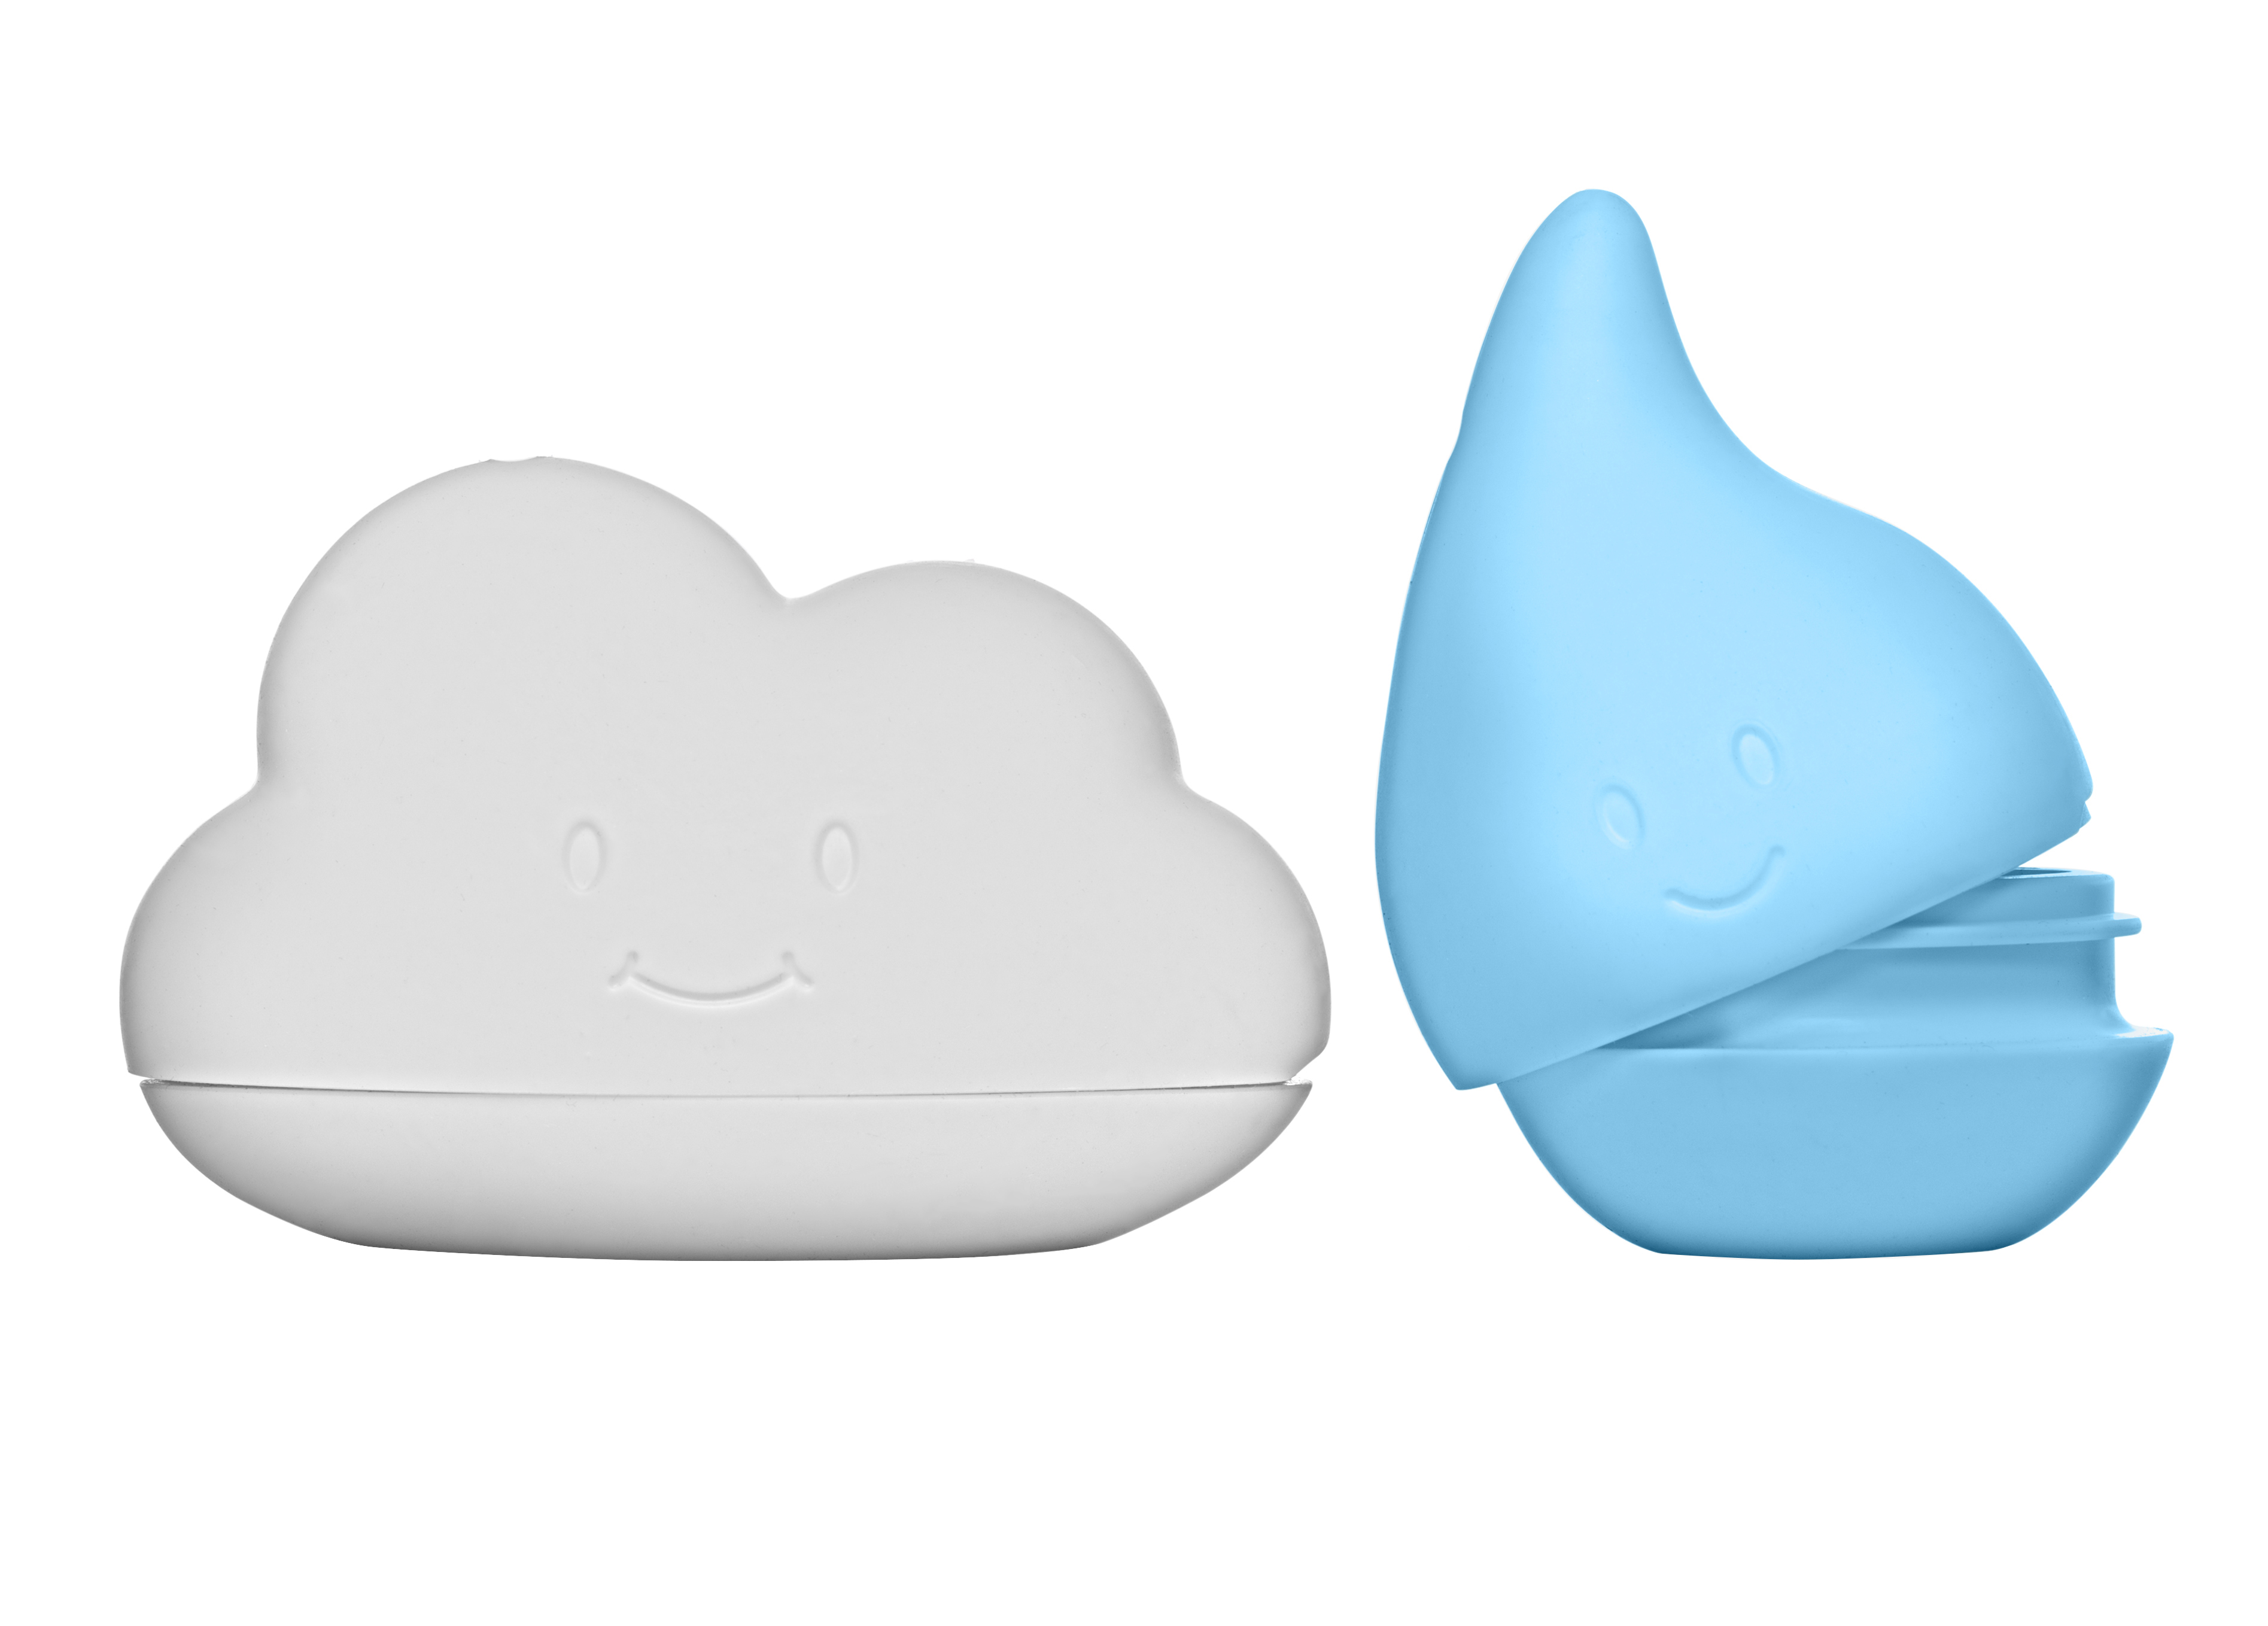 Cloud and Droplet Bath Toys